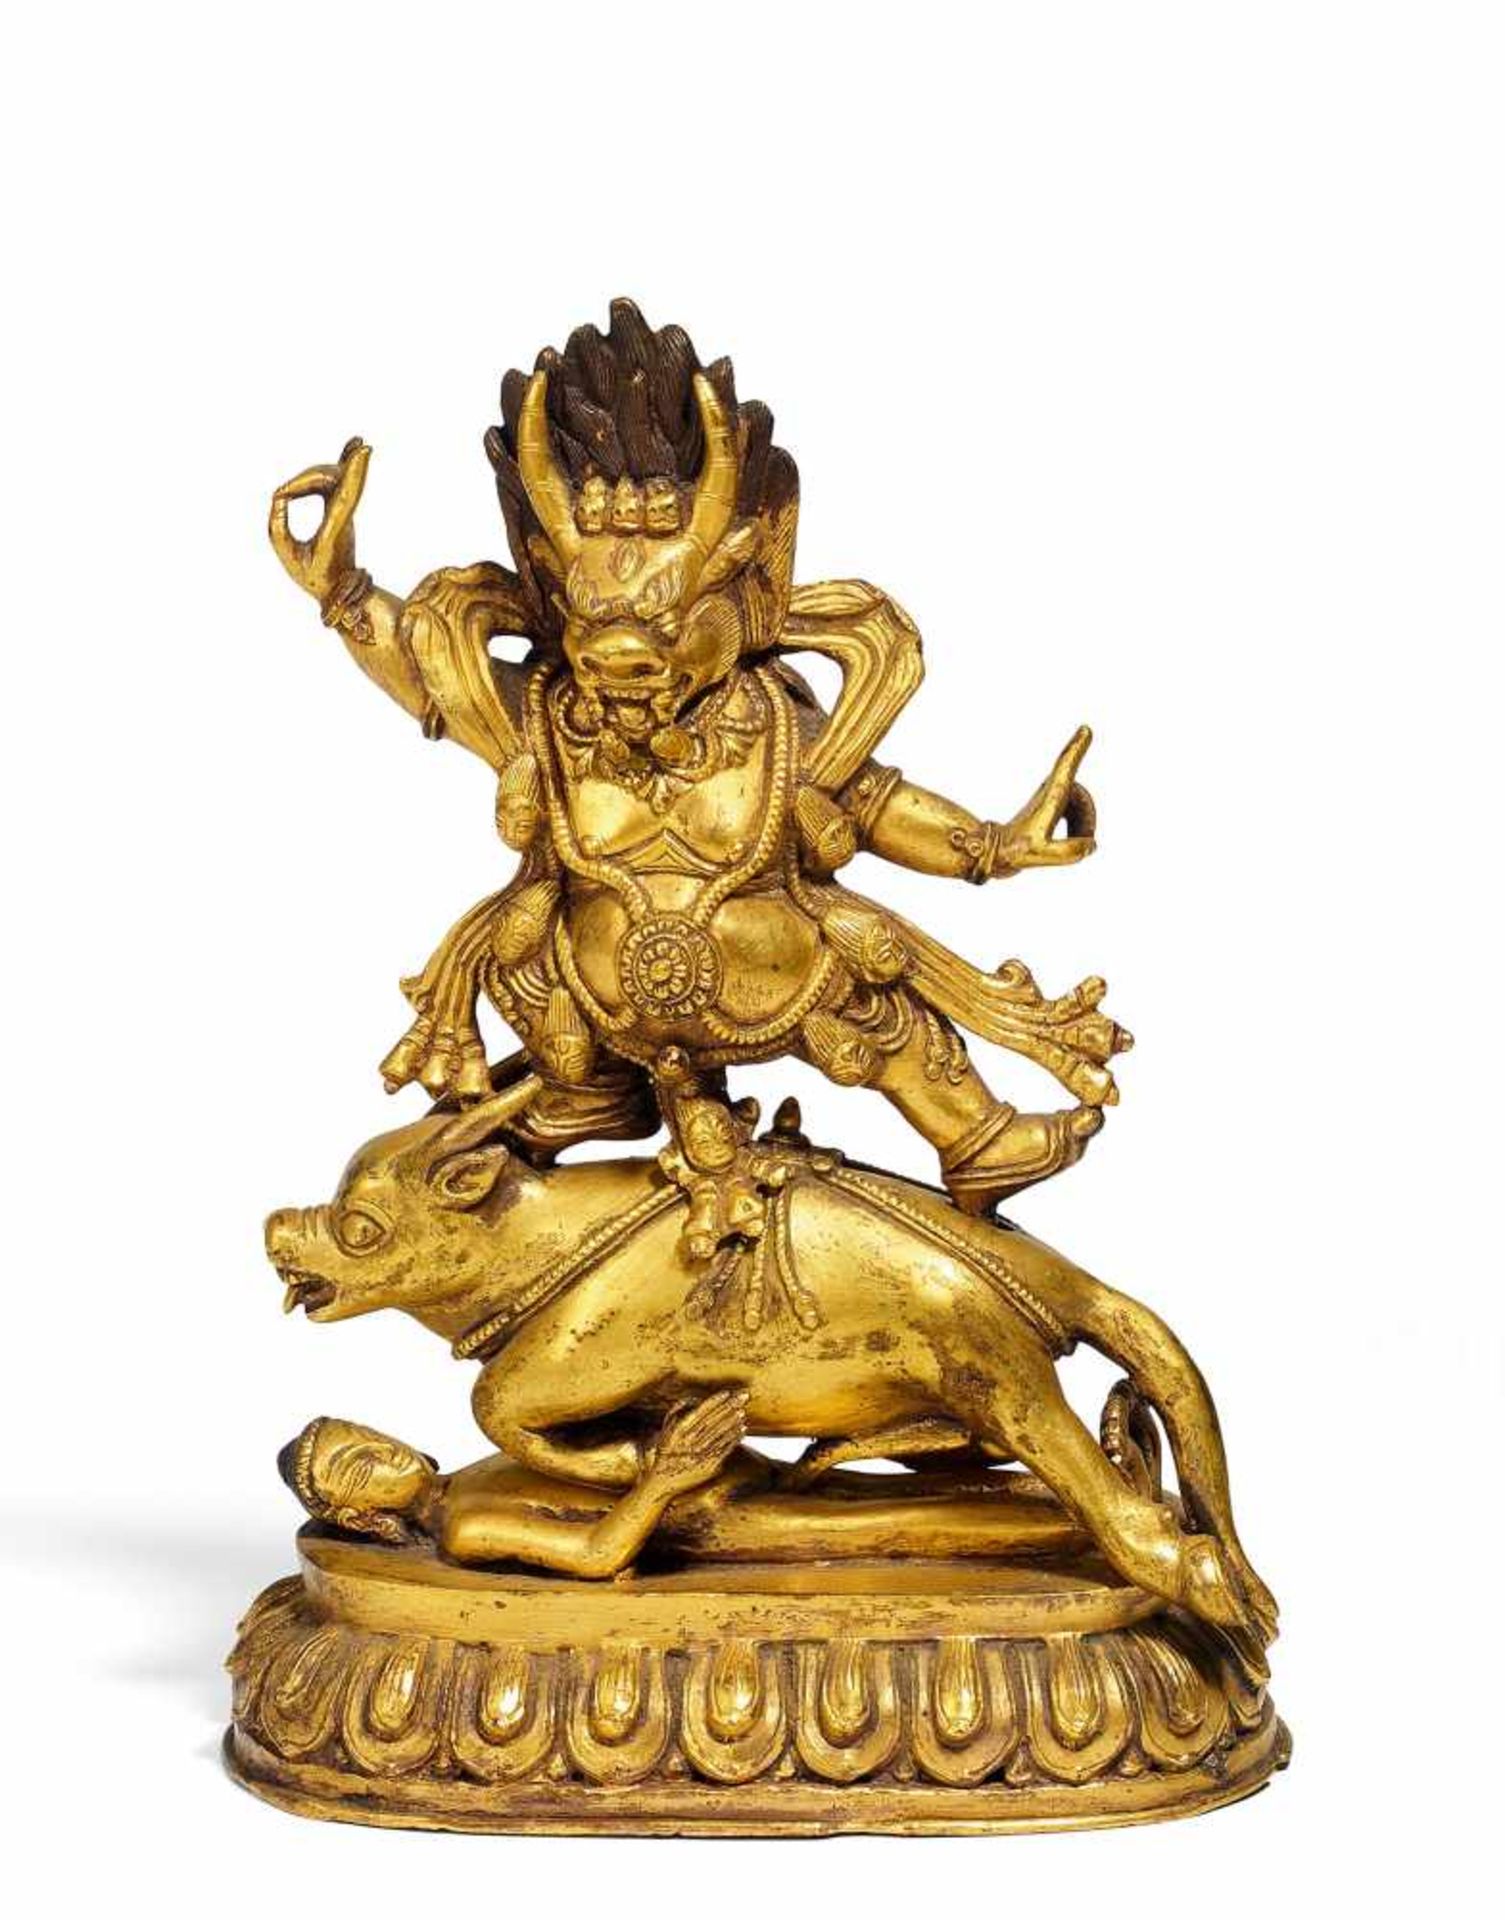 YAMA DHARMARAJA. Tibet. 18th/19th c. or later. Copper bronze with fire gilding. The god of death